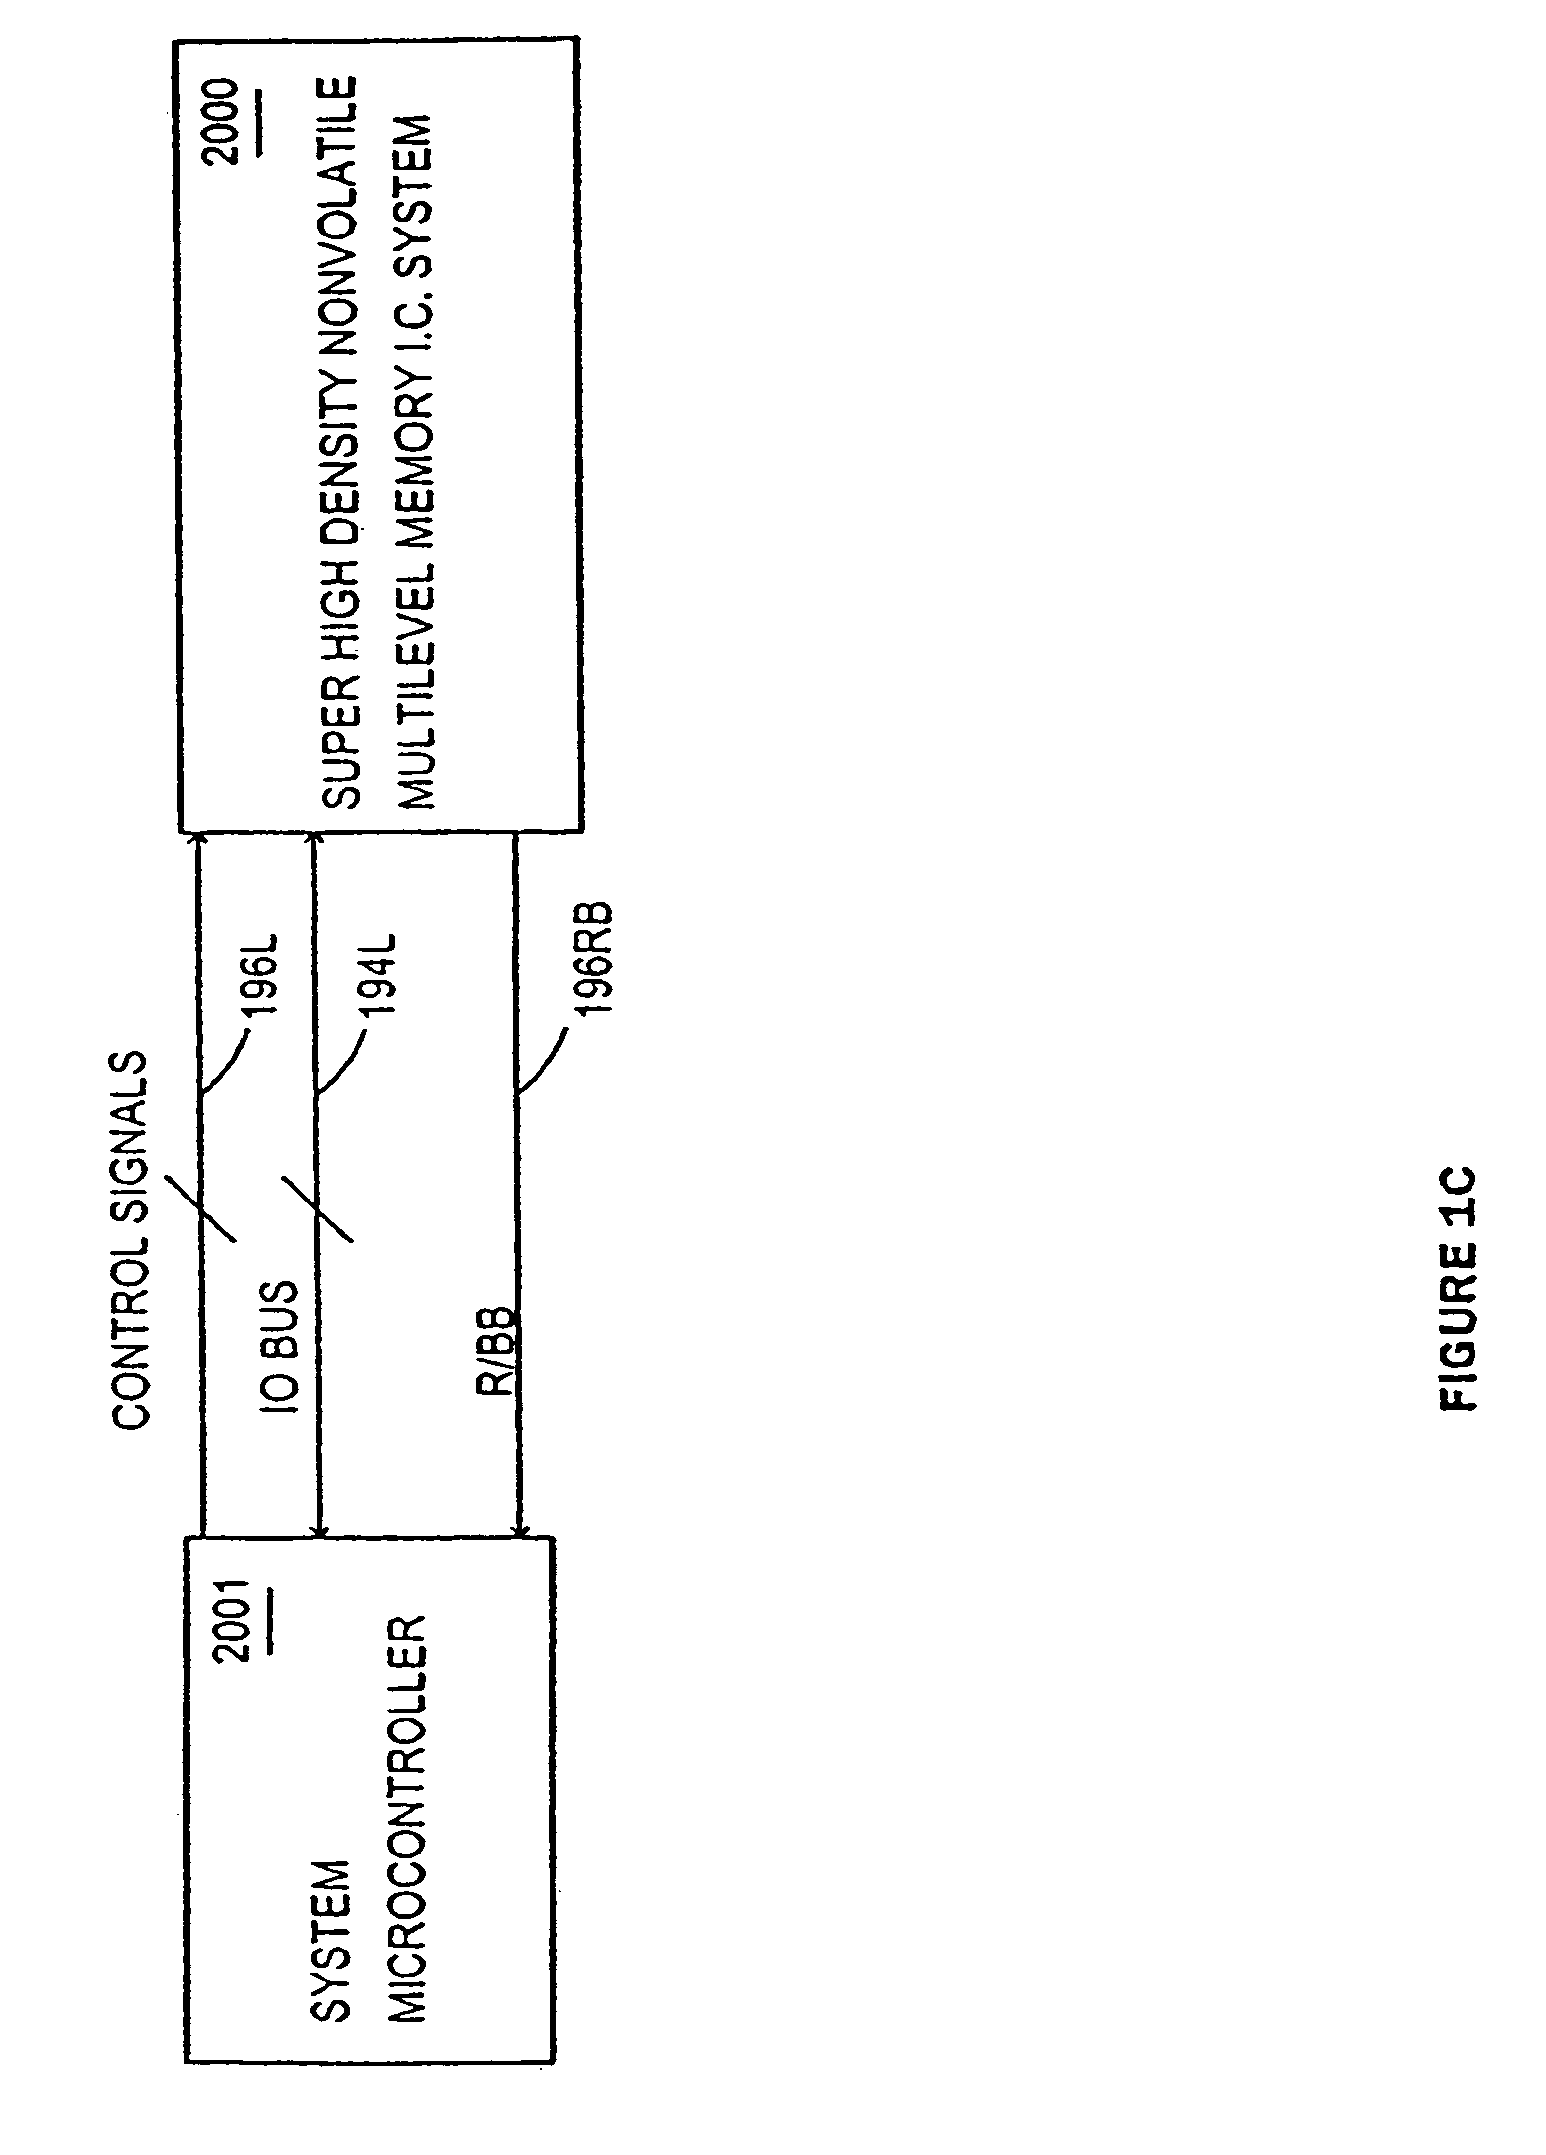 Seek window verify program system and method for a multilevel non-volatile memory integrated circuit system